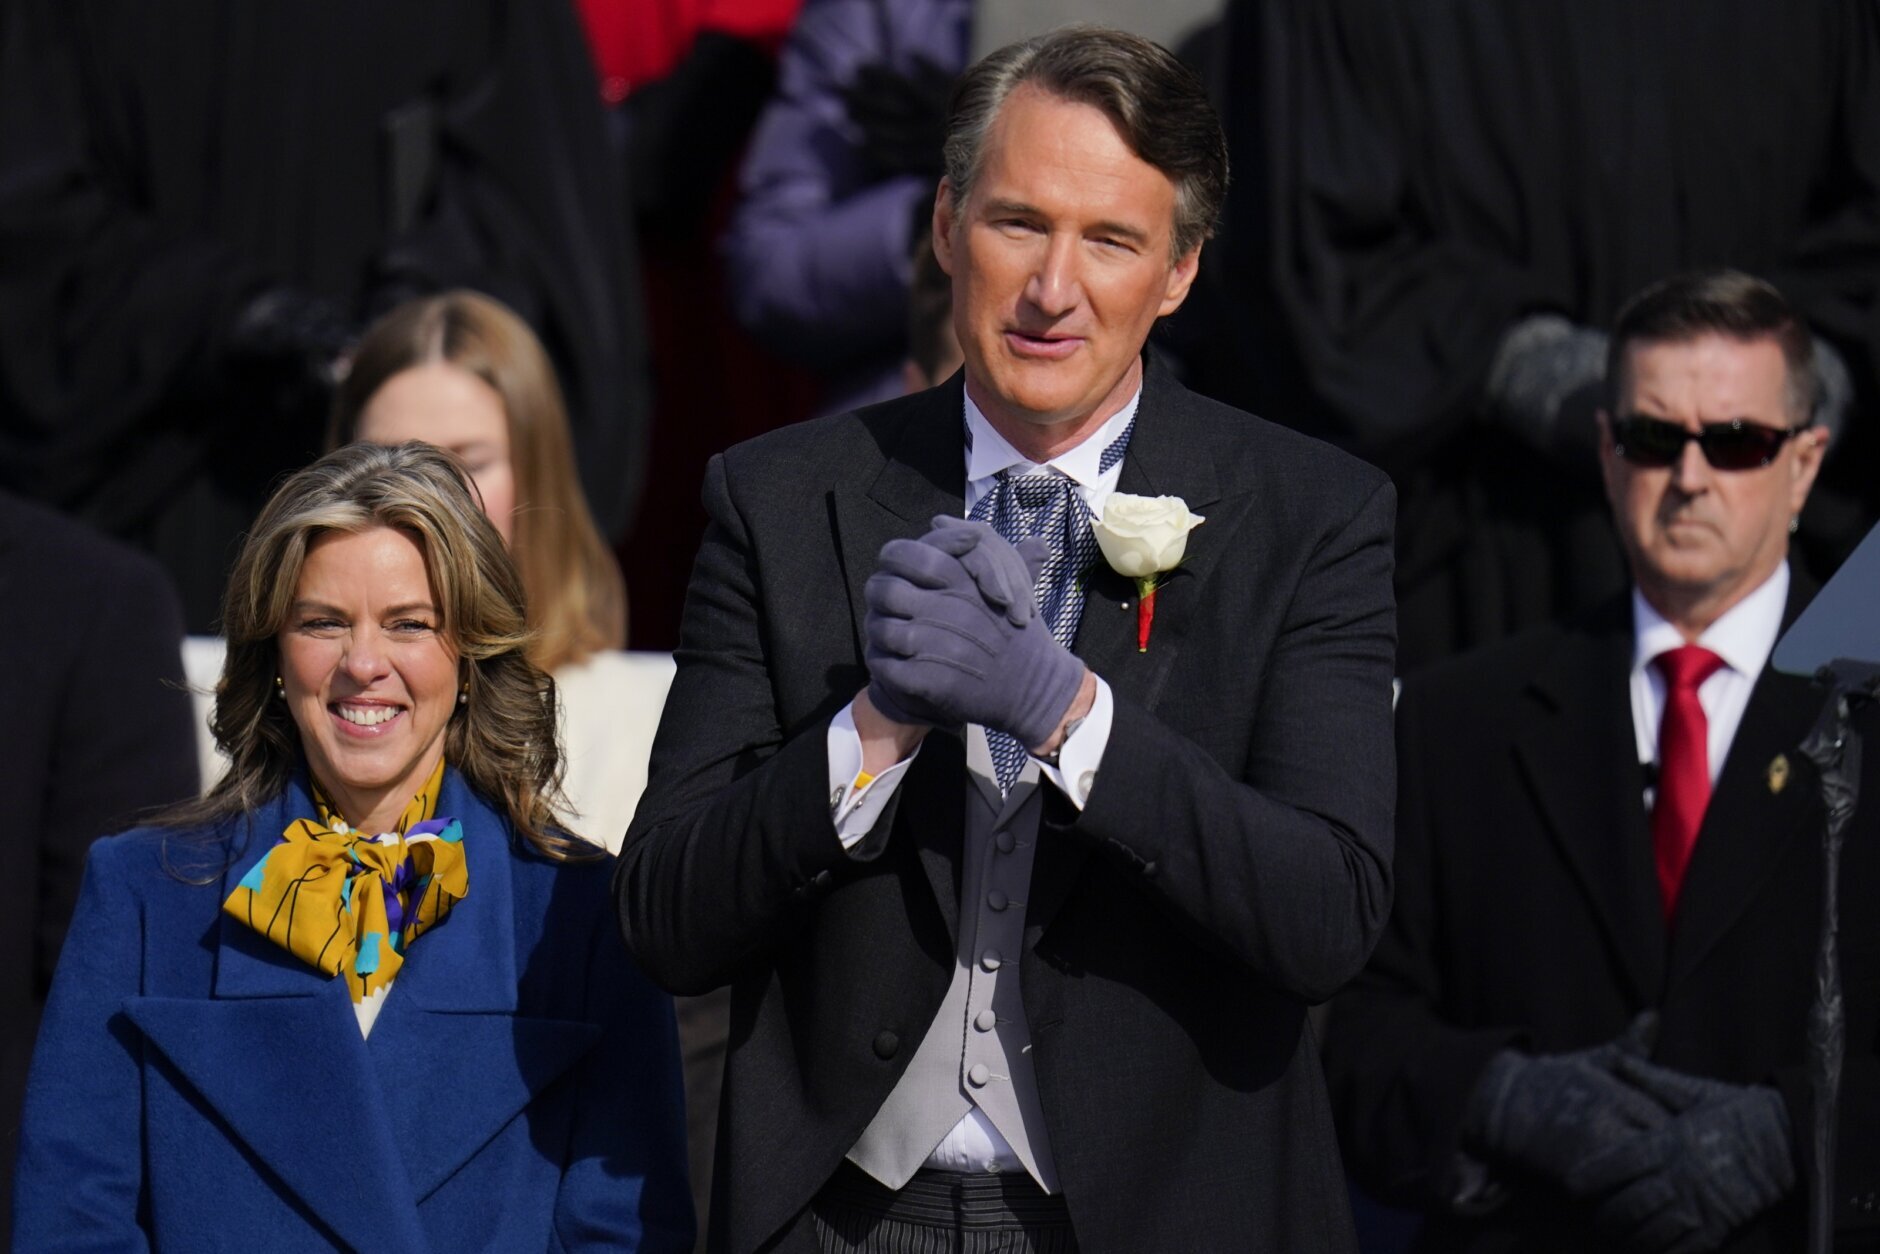 Gov. elect Glenn Youngkin with wife Suzanne Youngkin wave to the crowd before his inauguration ceremony, Saturday, Jan. 15, 2022, in Richmond, Va. (AP Photo/Julio Cortez)